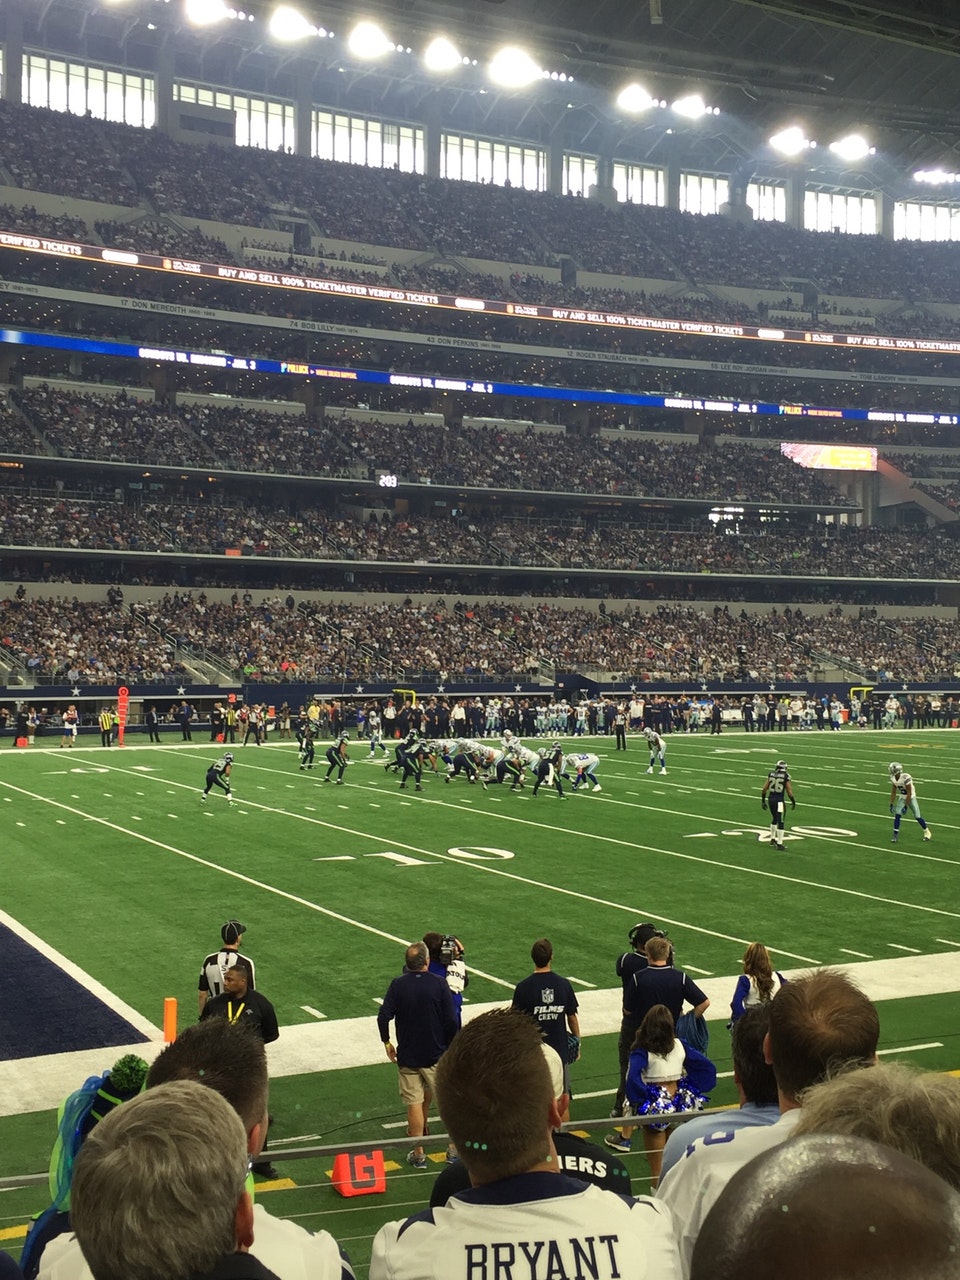 section 143, row 4 seat view  for football - at&t stadium (cowboys stadium)